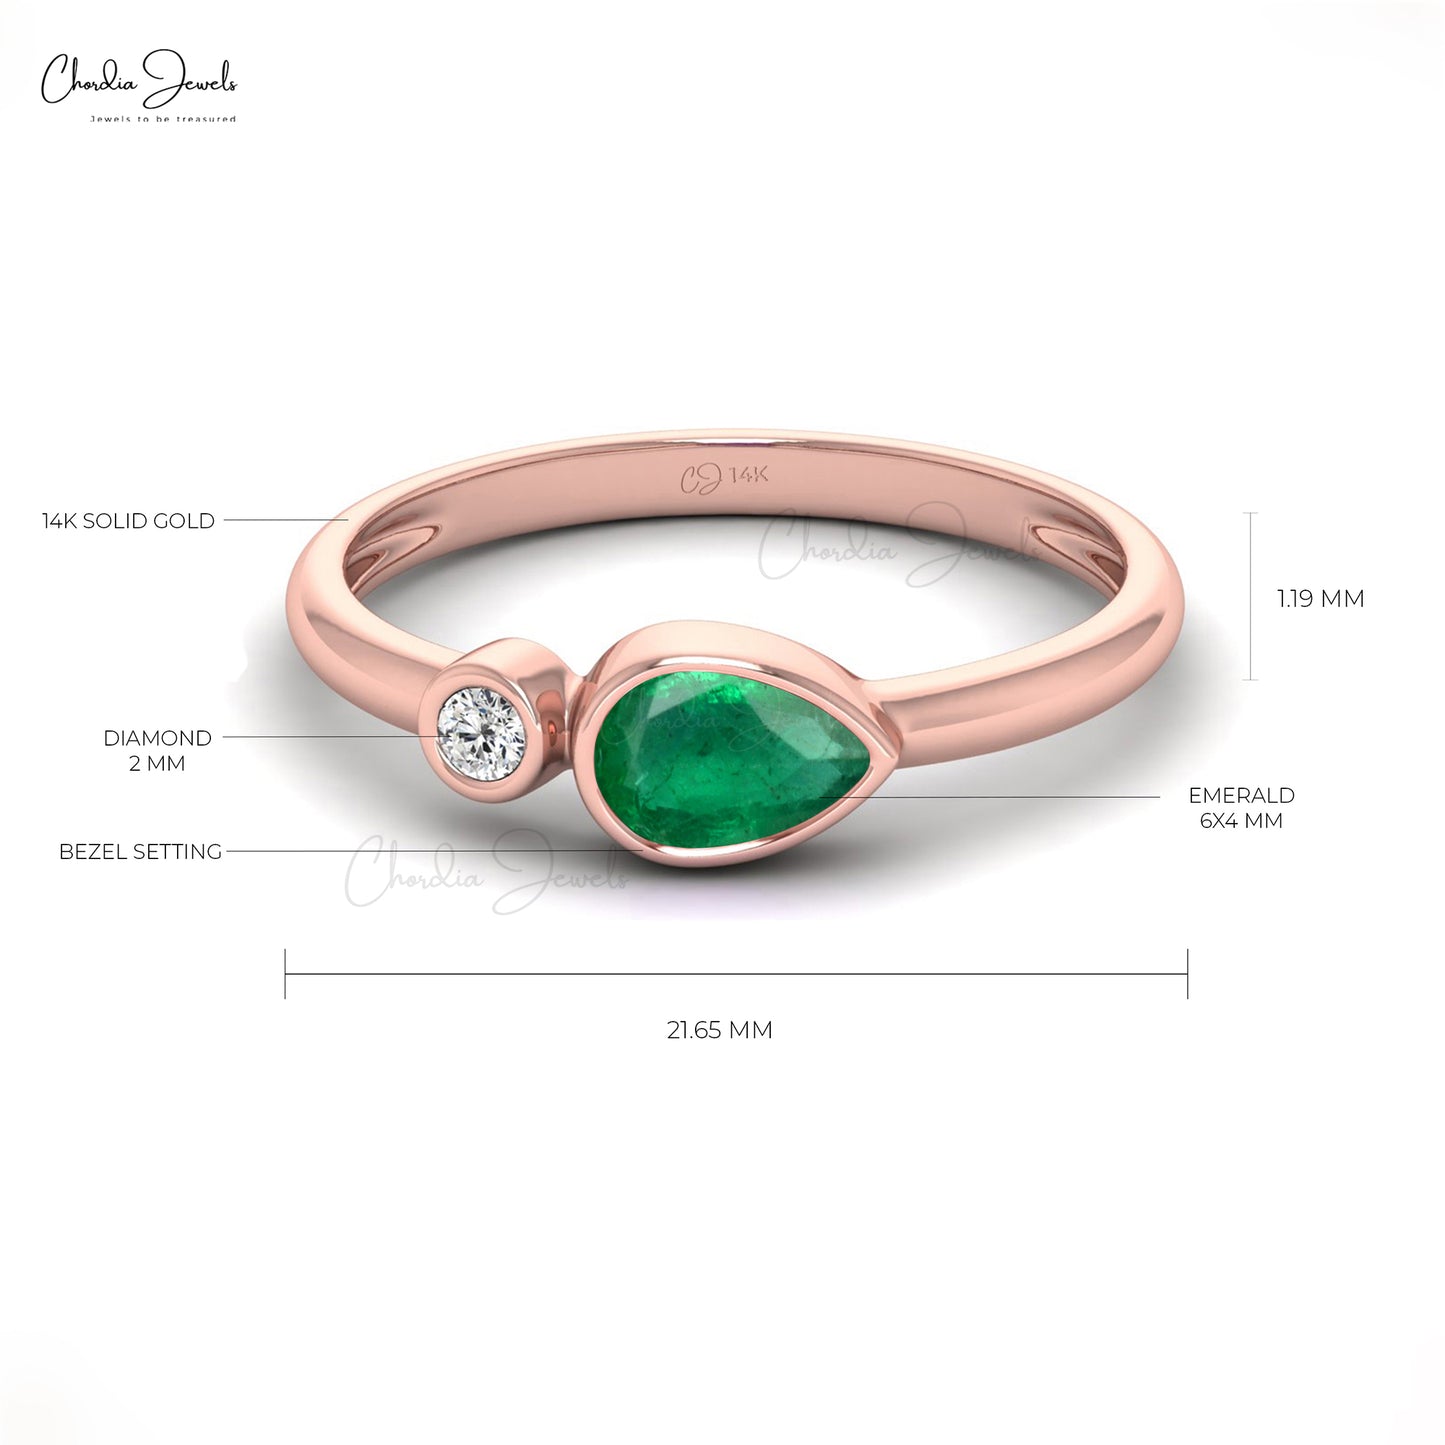 Load image into Gallery viewer, Genuine Emerald 6X4mm Pear Cut Gemstone Ring 14k Solid Gold White Diamond Dainty Ring For Her
